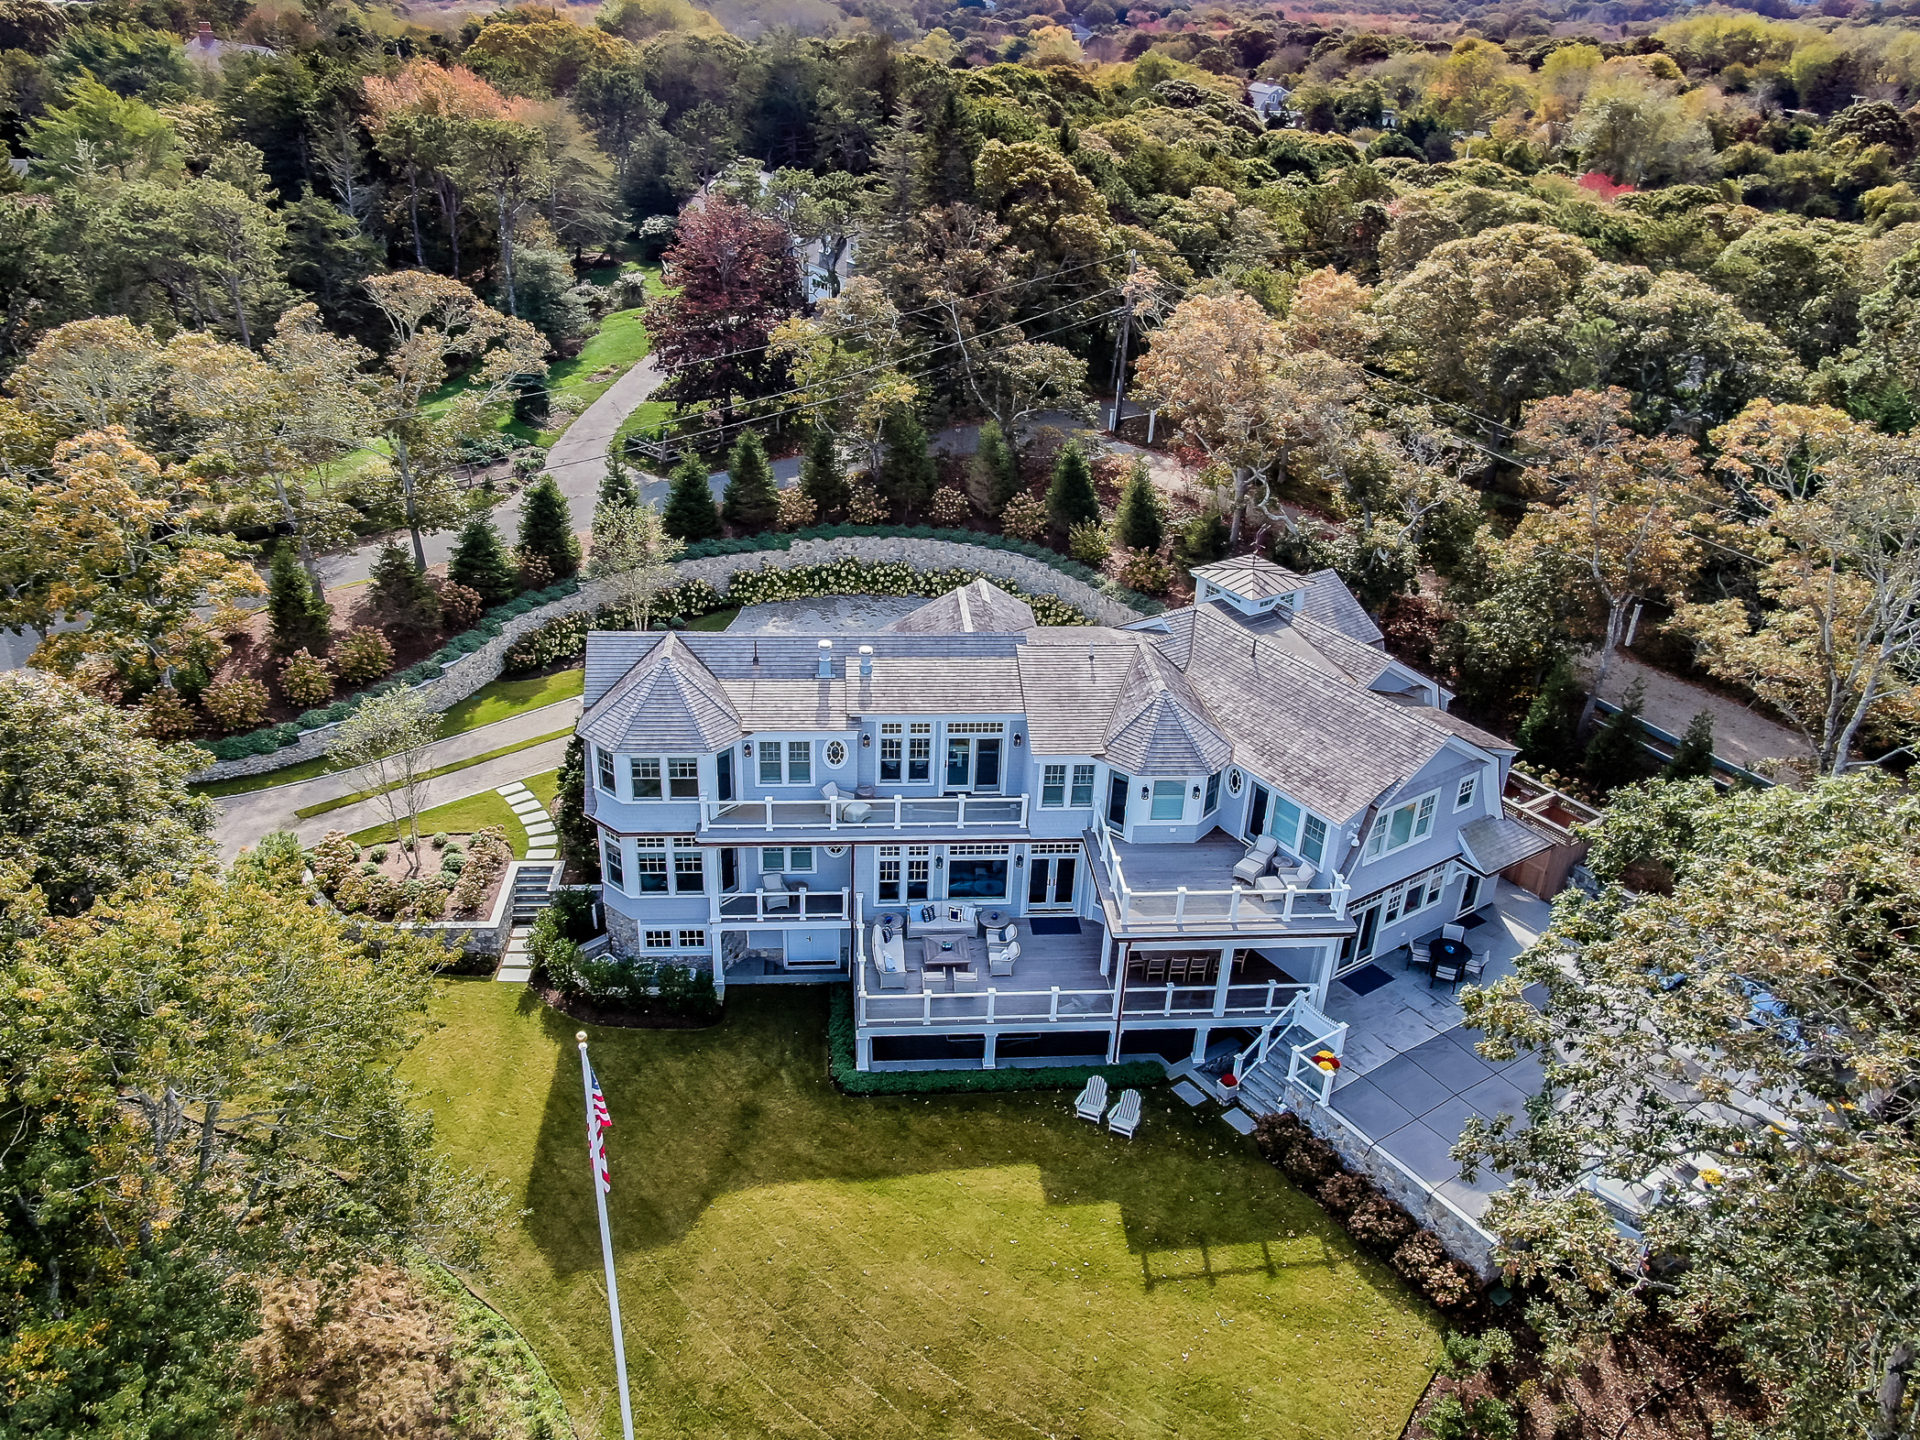 Aerial (drone) view of the back of a 2-story colonial style home in North Chatham, MA.